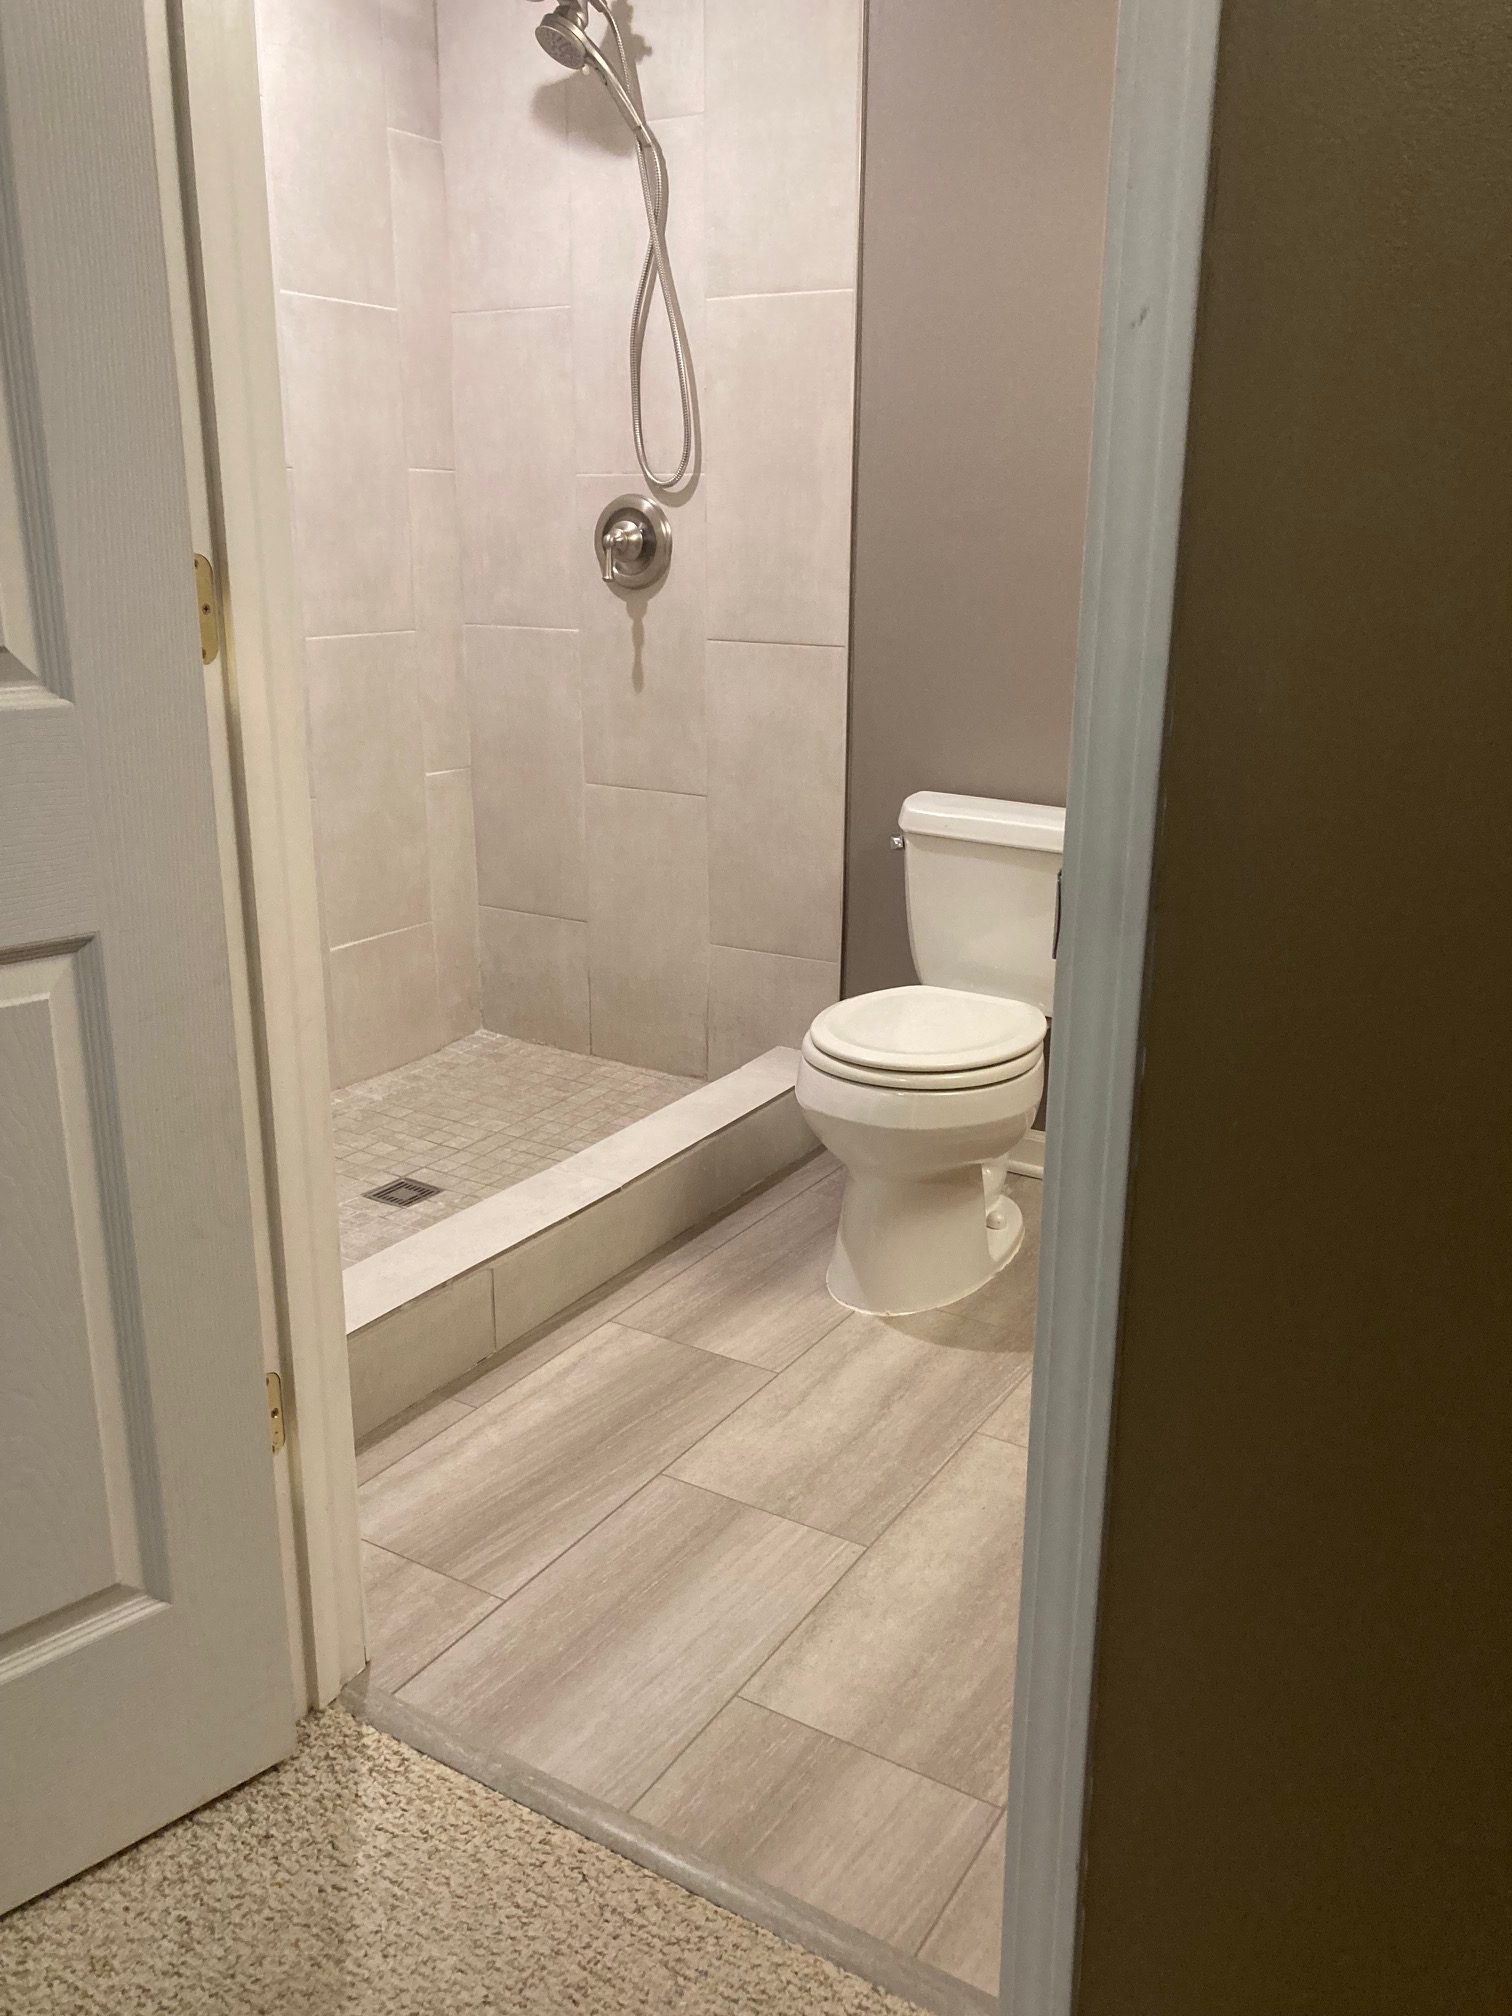 Bathroom Remodeling Services in New Hope and Nearby Areas